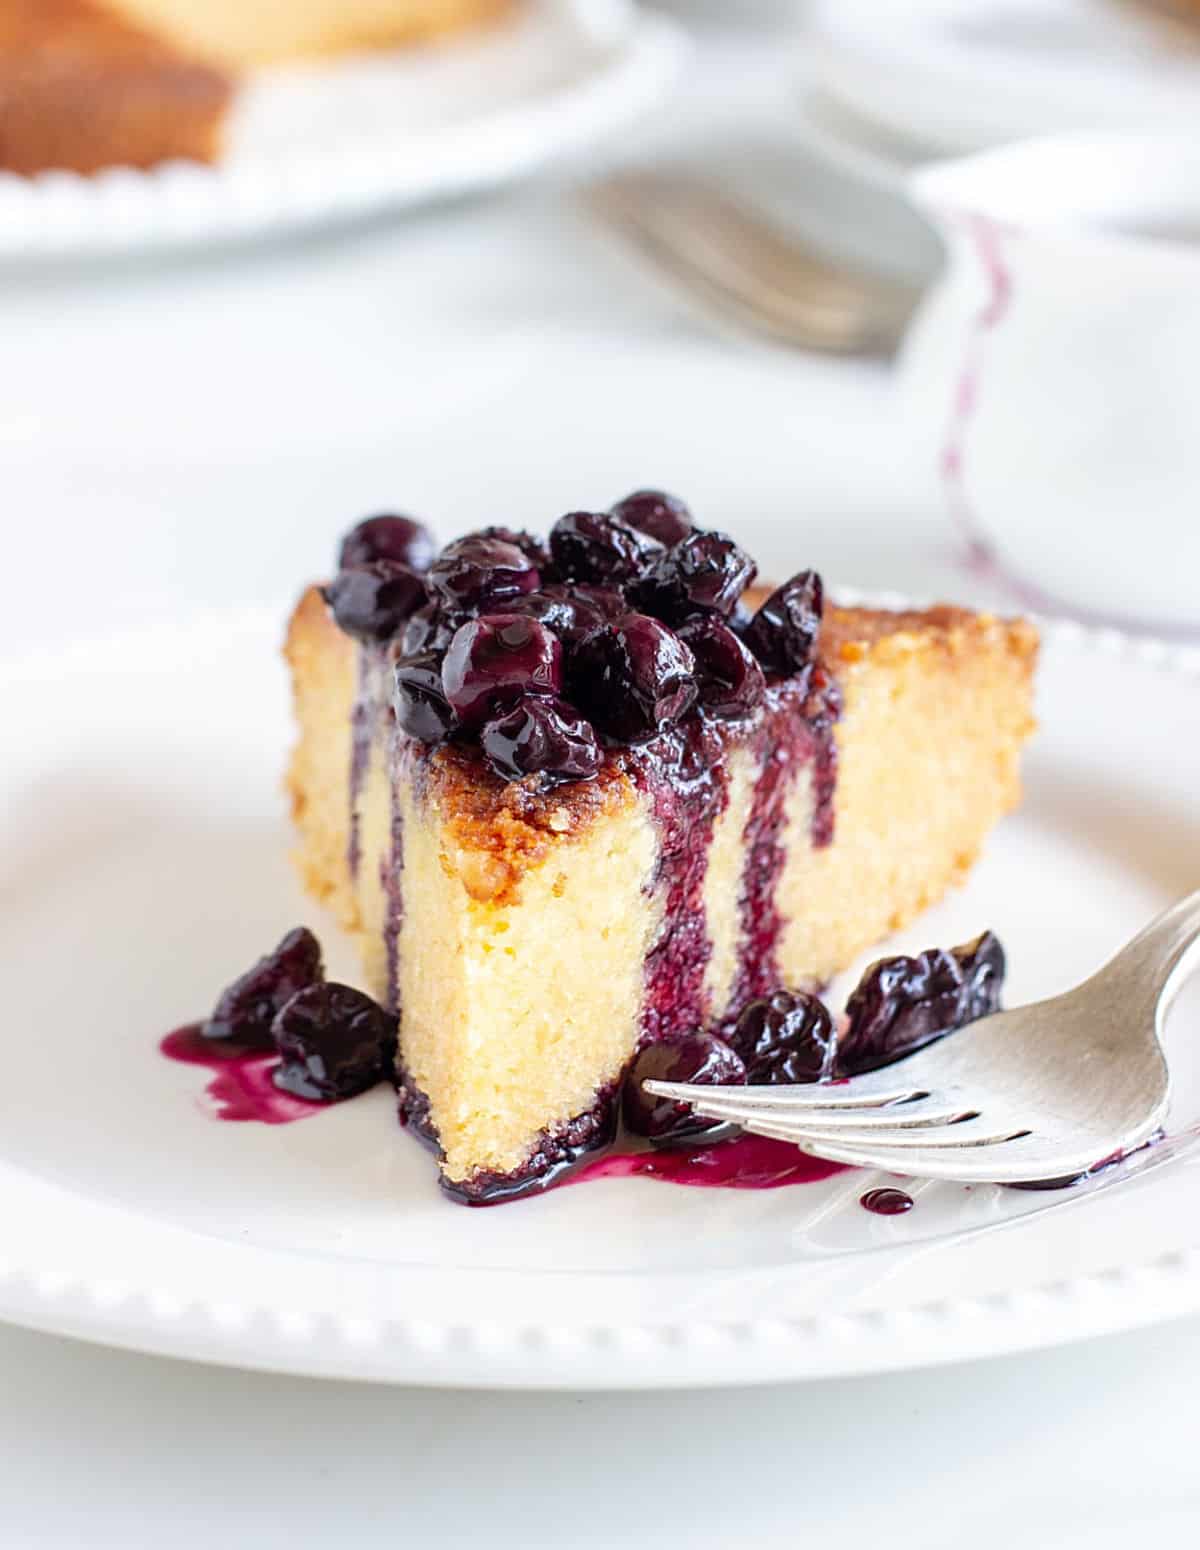 Slice of lemon cake with blueberry sauce on white plate, silver fork, white props on background.